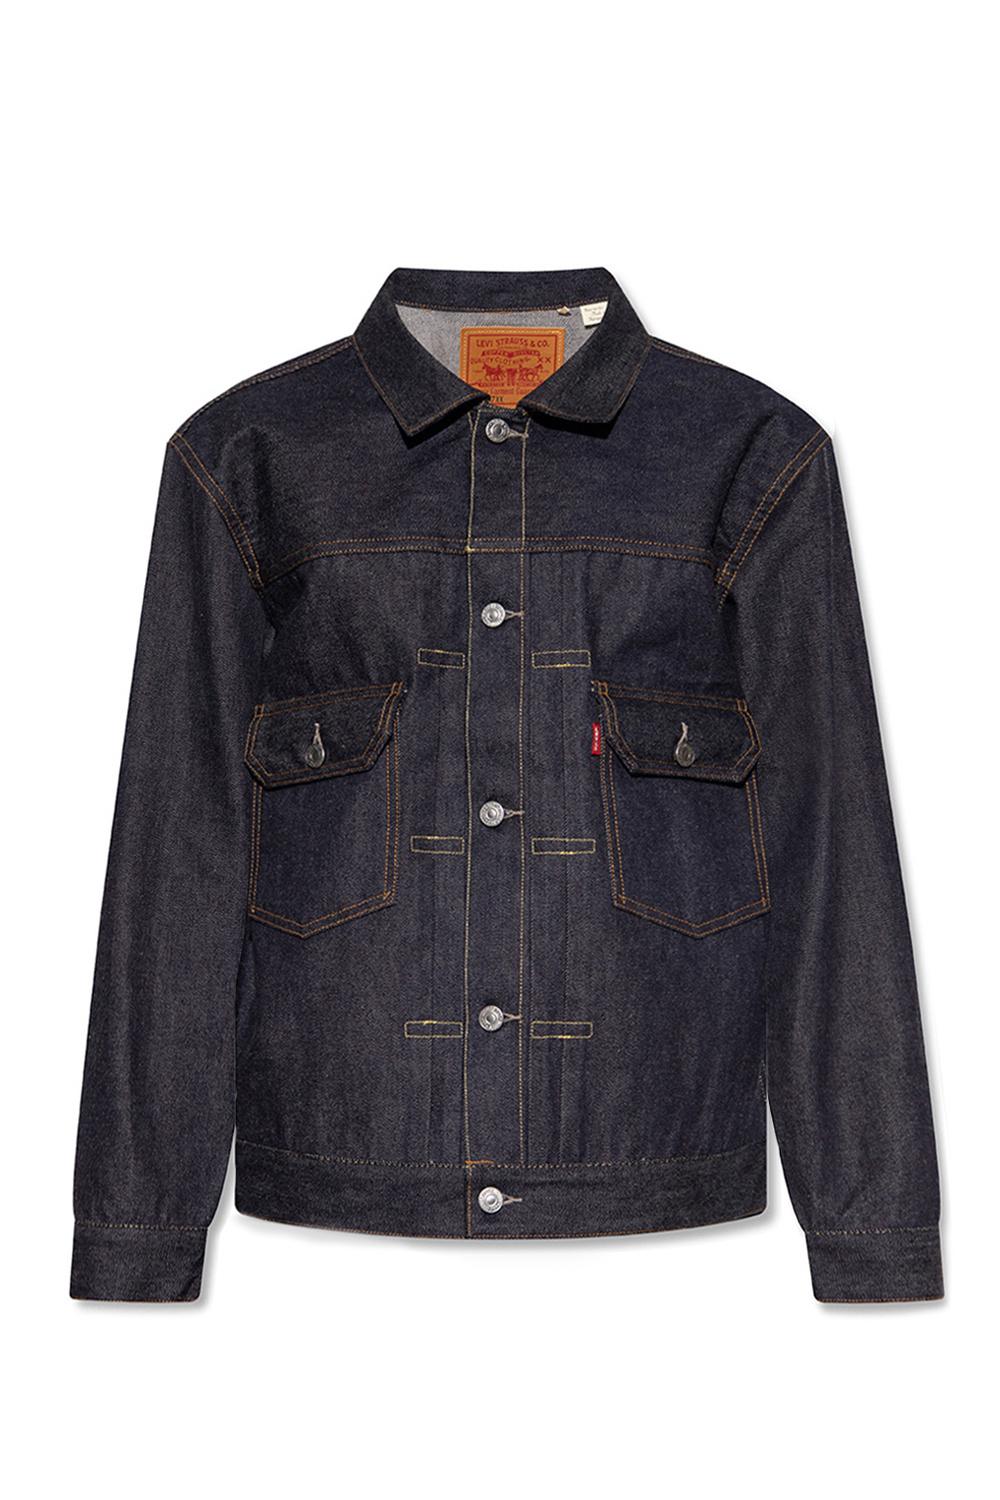 IetpShops | Men's Clothing ons | Levi's The 'Vintage Clothing